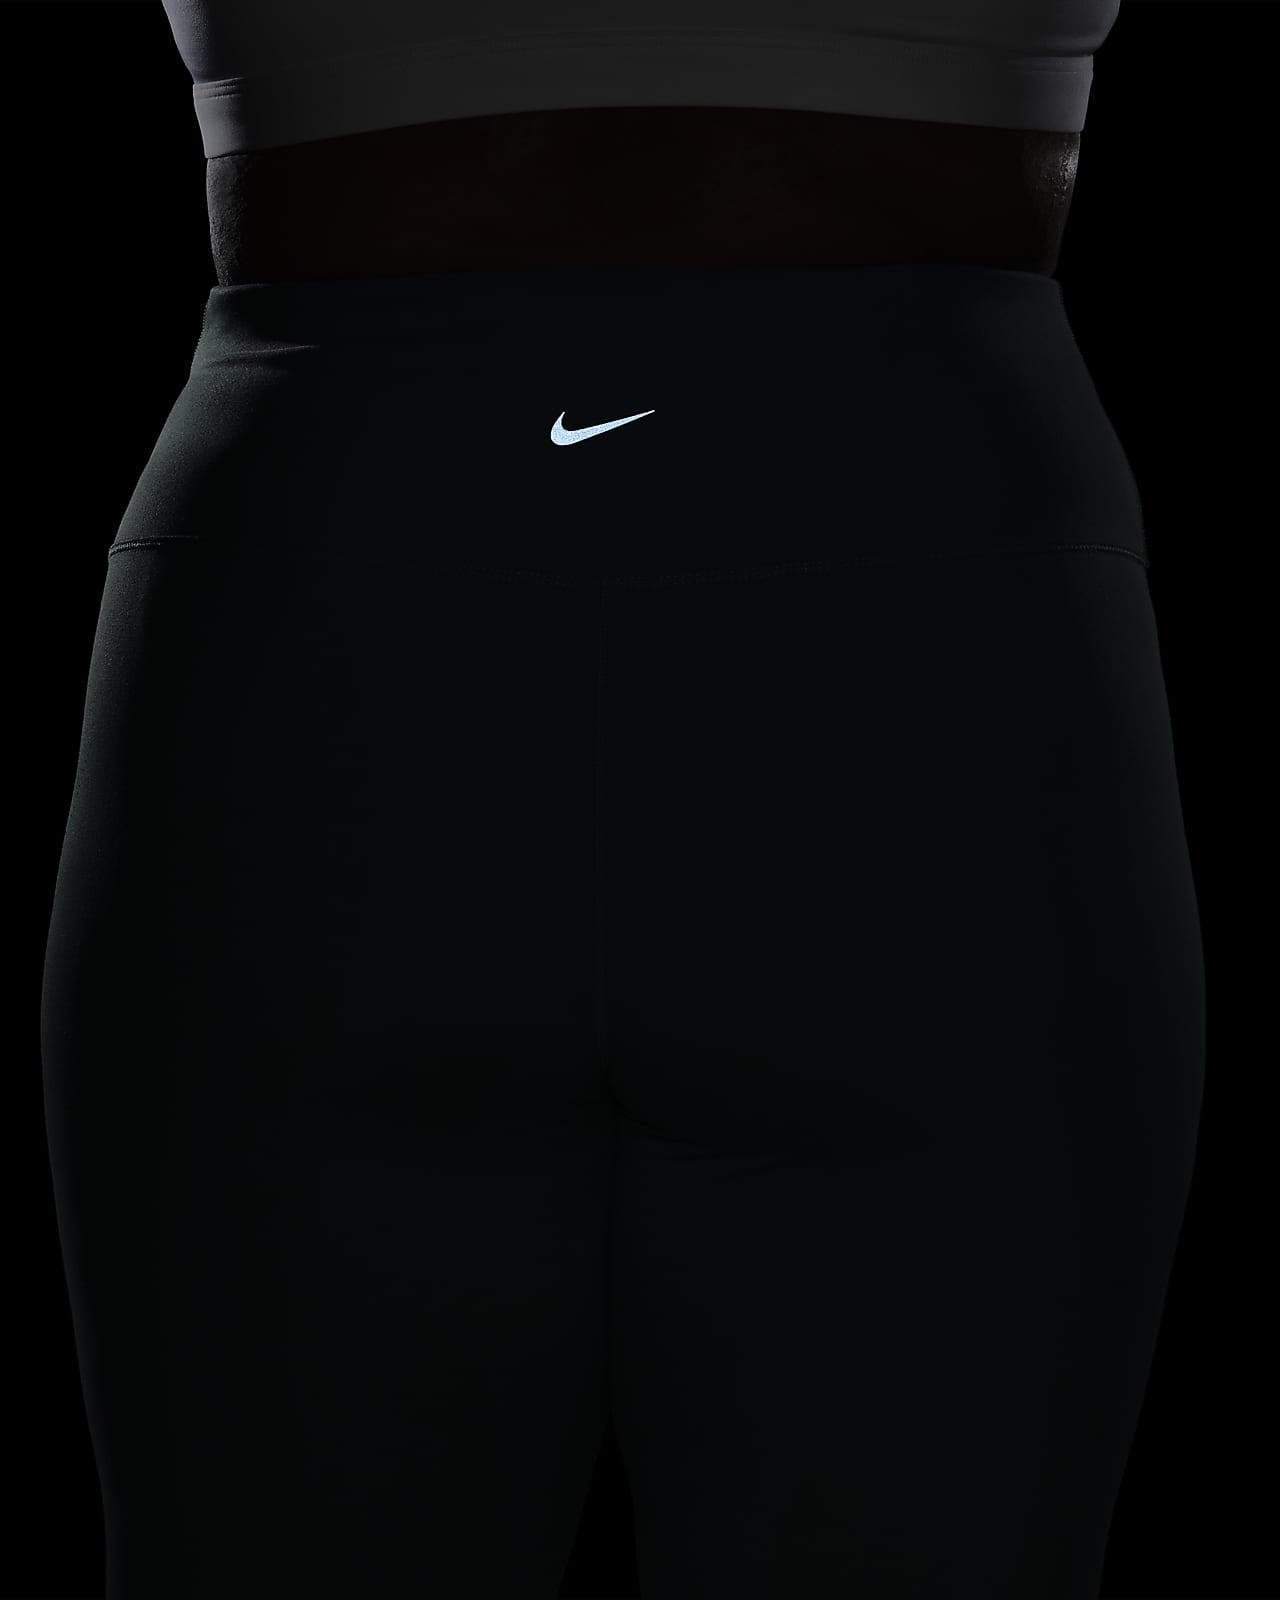 Nike Air One Women's 7/8 Performance Tight Fit Large. CN5219-010